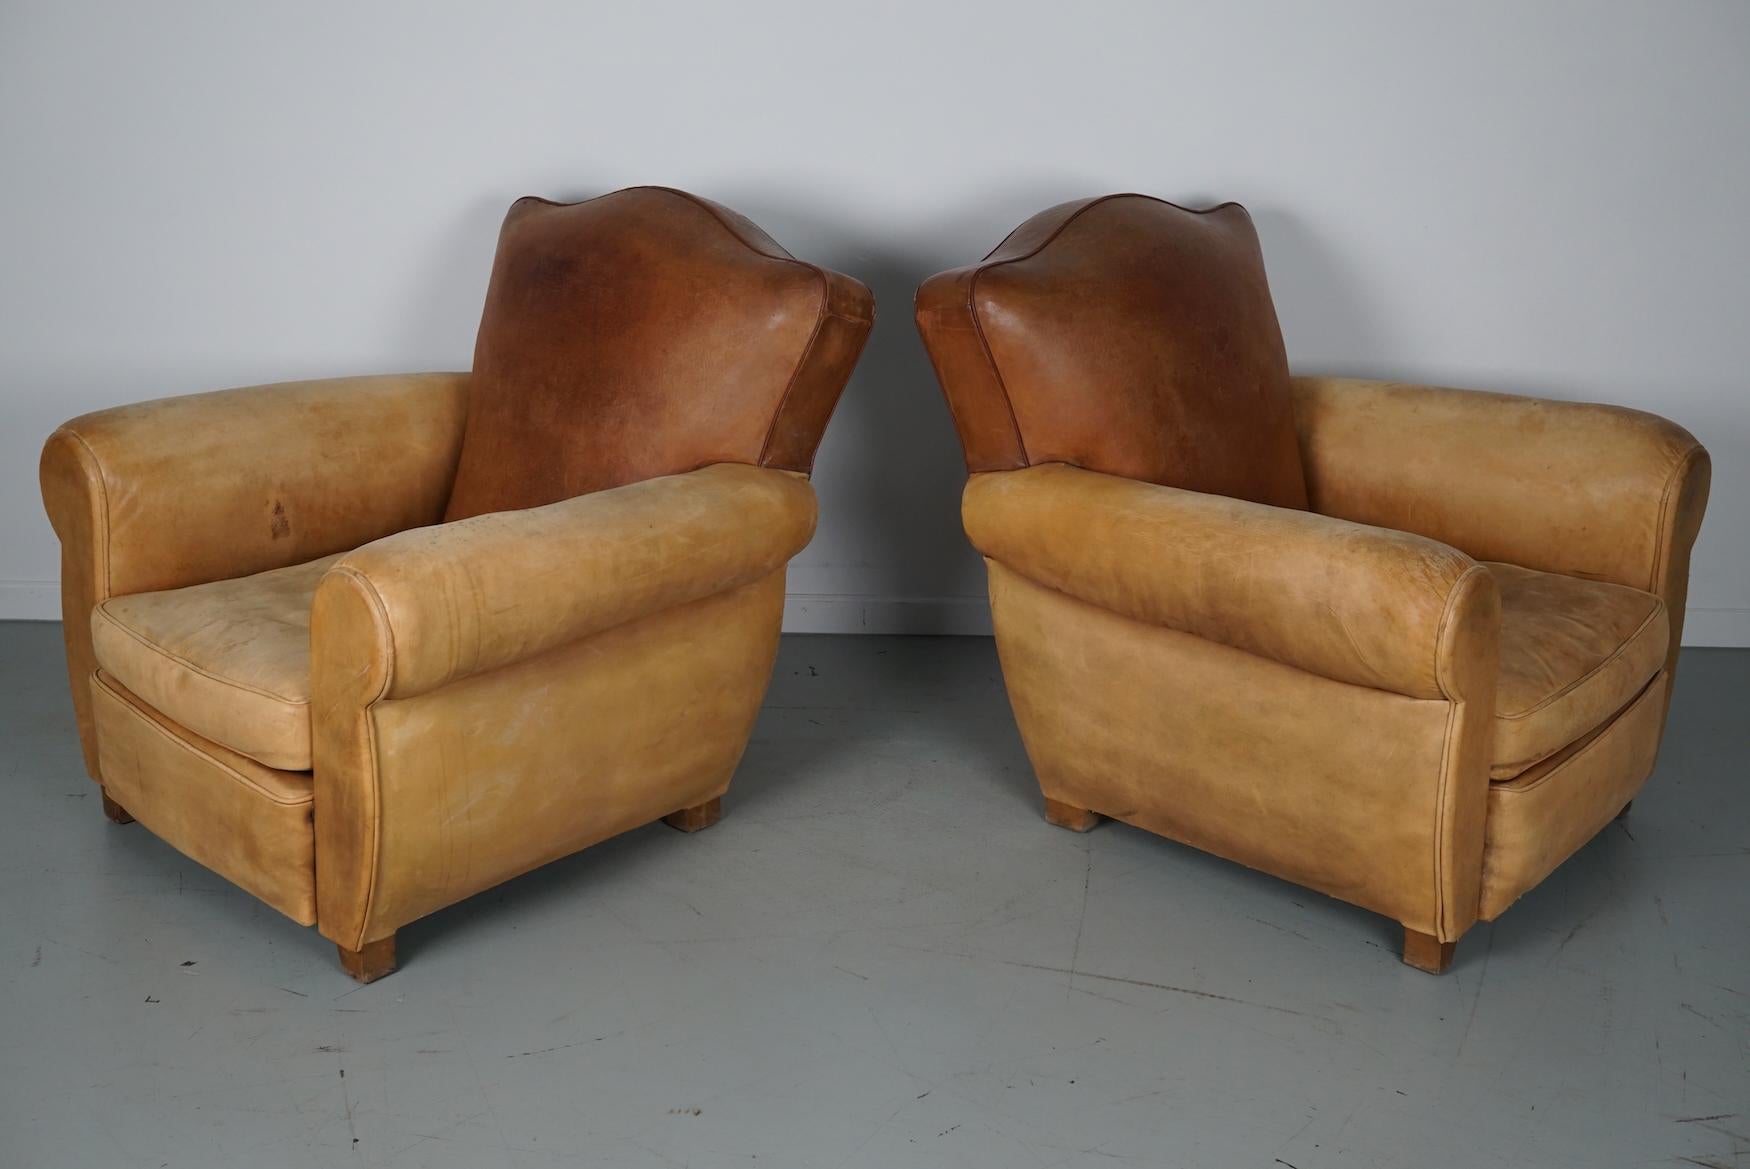  Pair of French Cognac Moustache Back Leather Club Chairs, 1940s For Sale 5